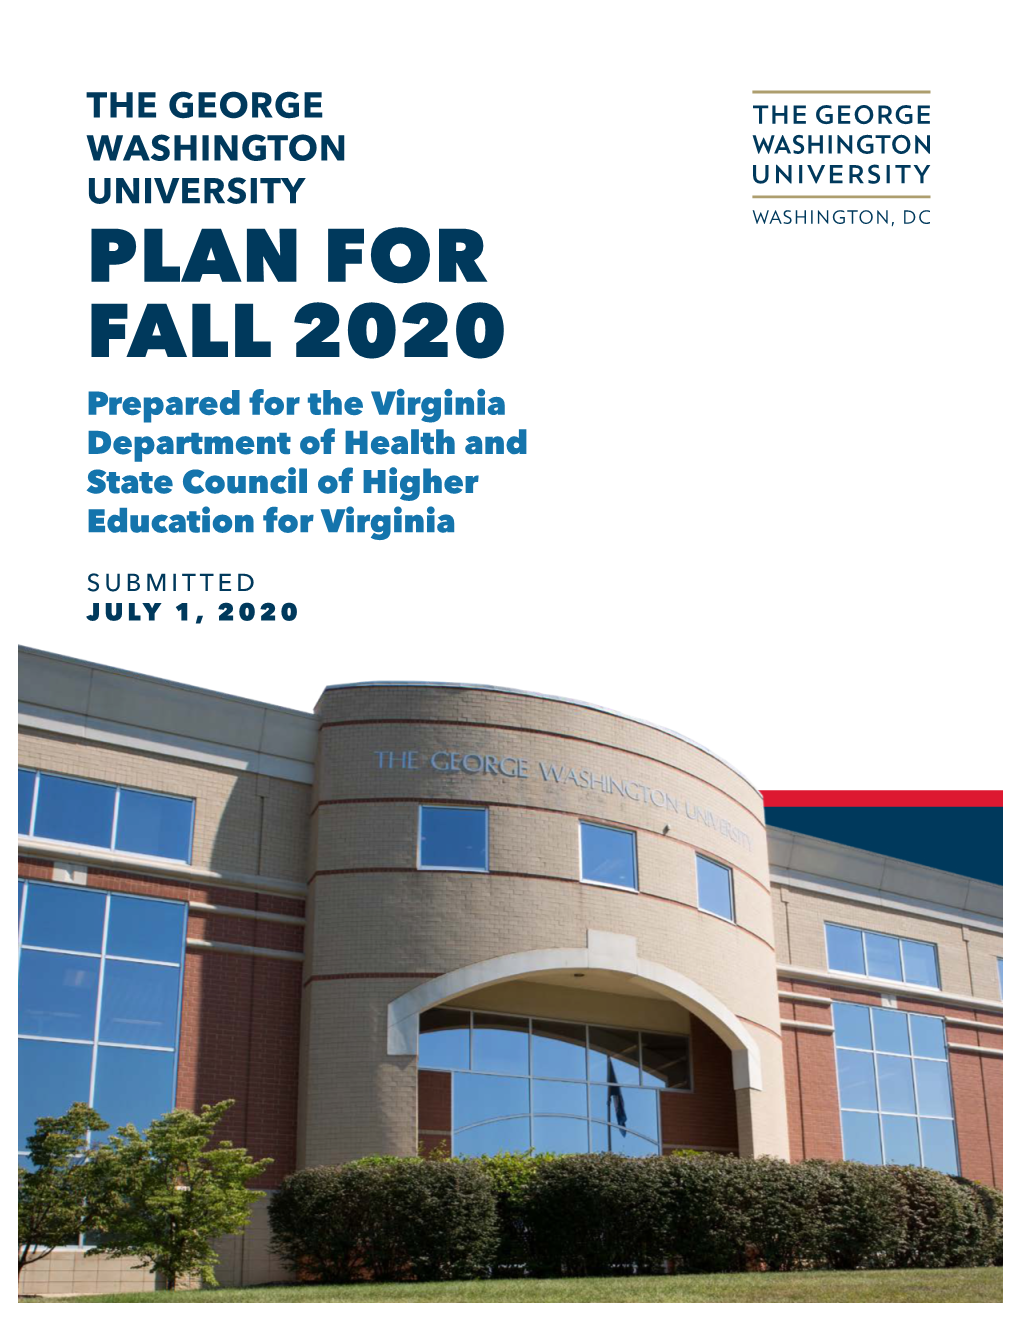 PLAN for FALL 2020 Prepared for the Virginia Department of Health and State Council of Higher Education for Virginia